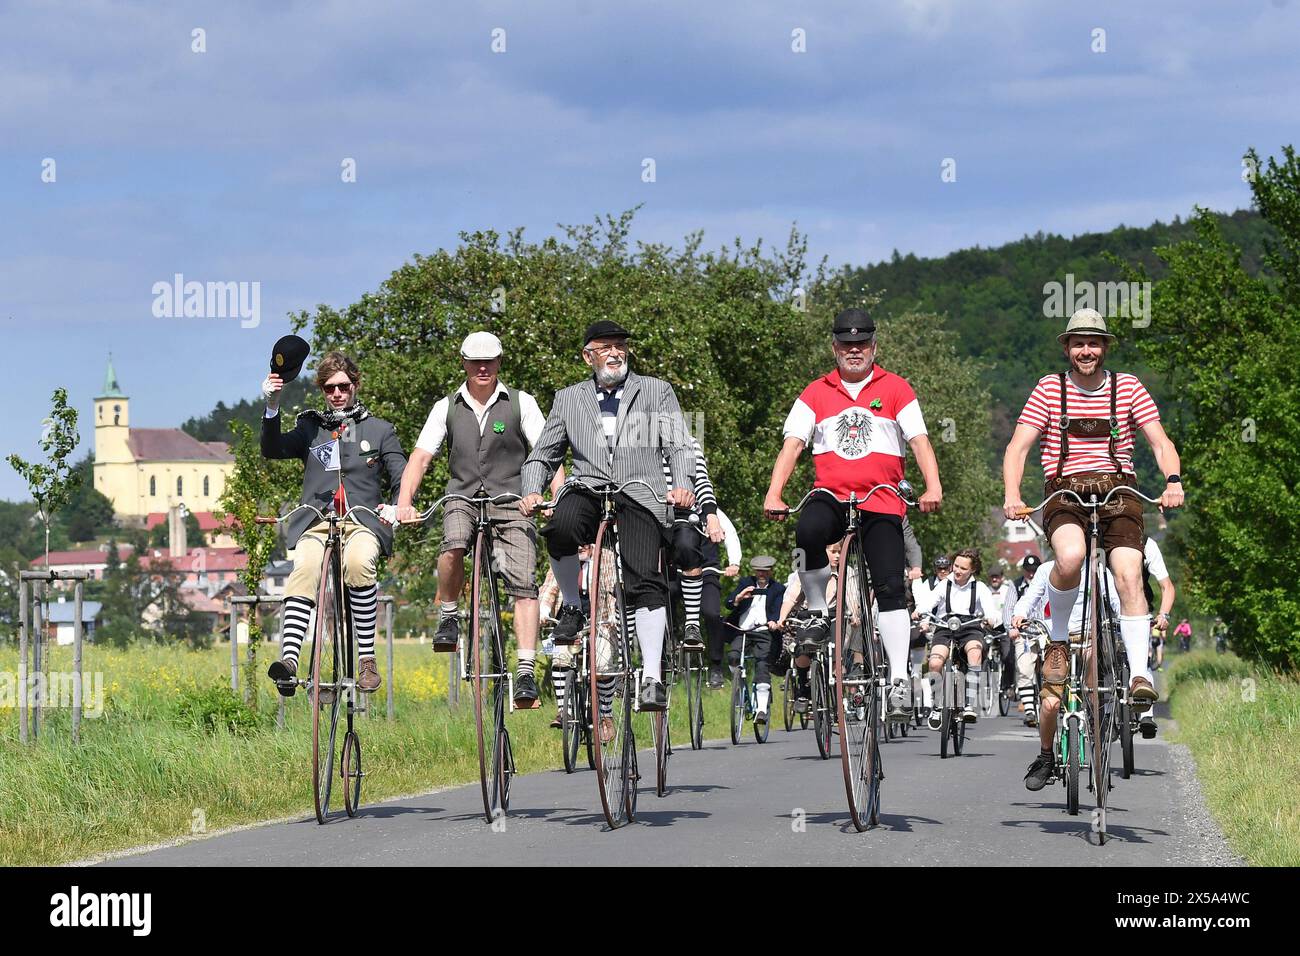 May 8, 2024, Vsen, Czech Republic: Historic High Wheel Penny-farthing bicycle ride in Vsen in the Bohemian Paradise region of the Czech Republic. Vintage with a bright twist, hoping to win the best dressed bike competition in the annual Historic High Wheel Penny-farthing bicycles ride. The penny-farthing, also known as a high wheel and ordinary, is a type of bicycle with a large front wheel and a much smaller rear wheel. It was popular after the boneshaker until the development of the safety bicycle in the 1880s. It was the first machine to be called a ''bicycle' (Credit Image: © Slavek Ruta/Z Stock Photo